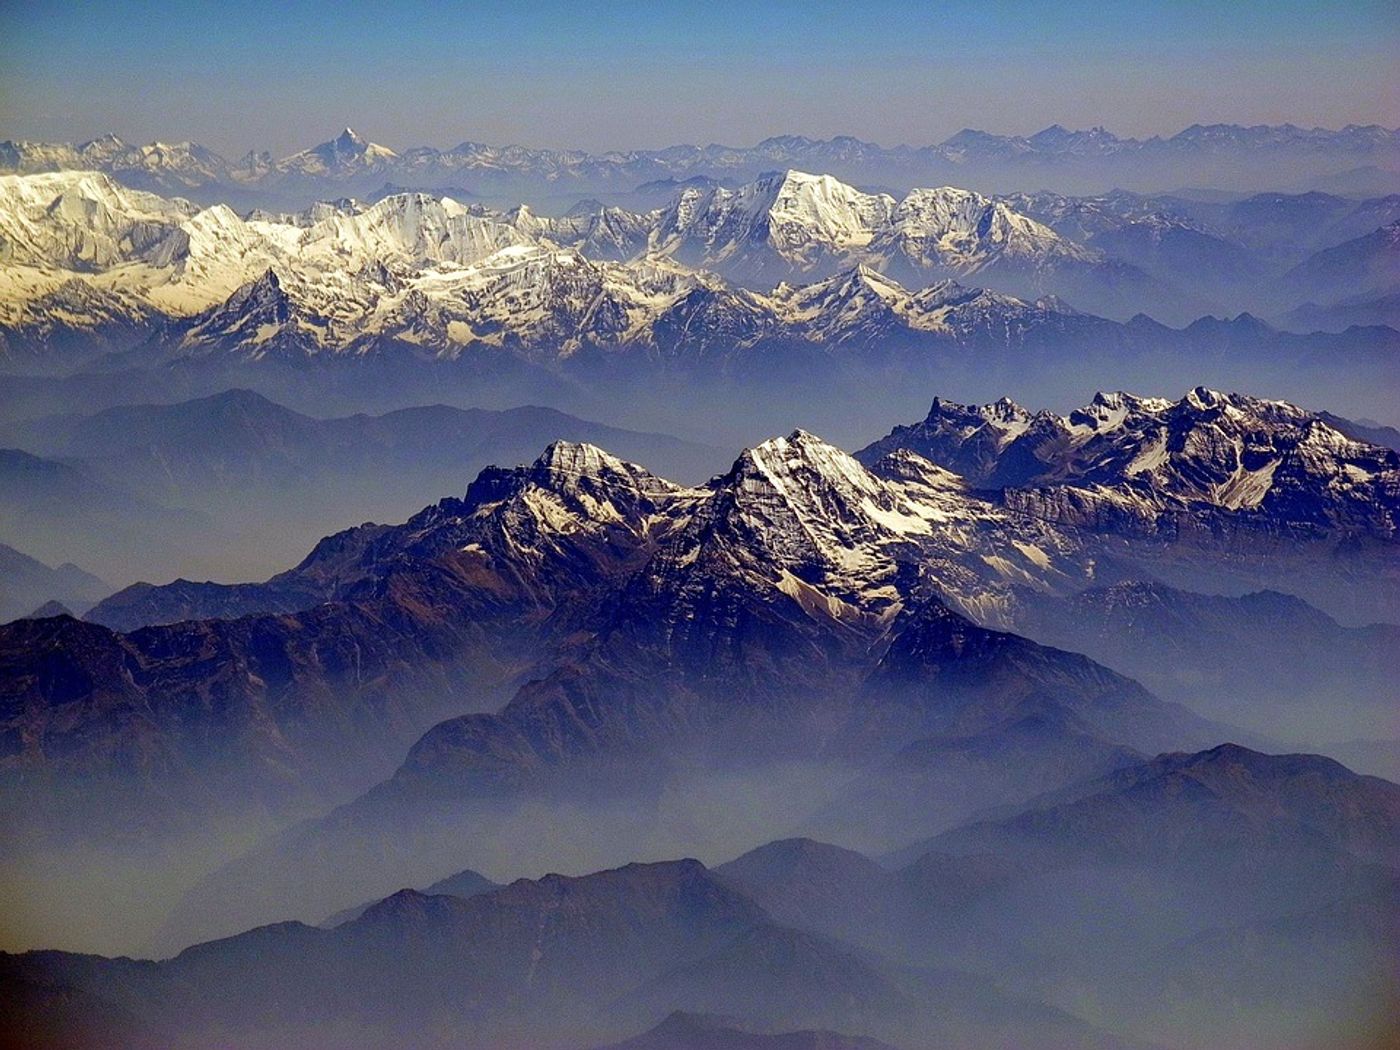 The Himalaya glaciers feed rivers that provides millions of people with water. Photo: Pixabay